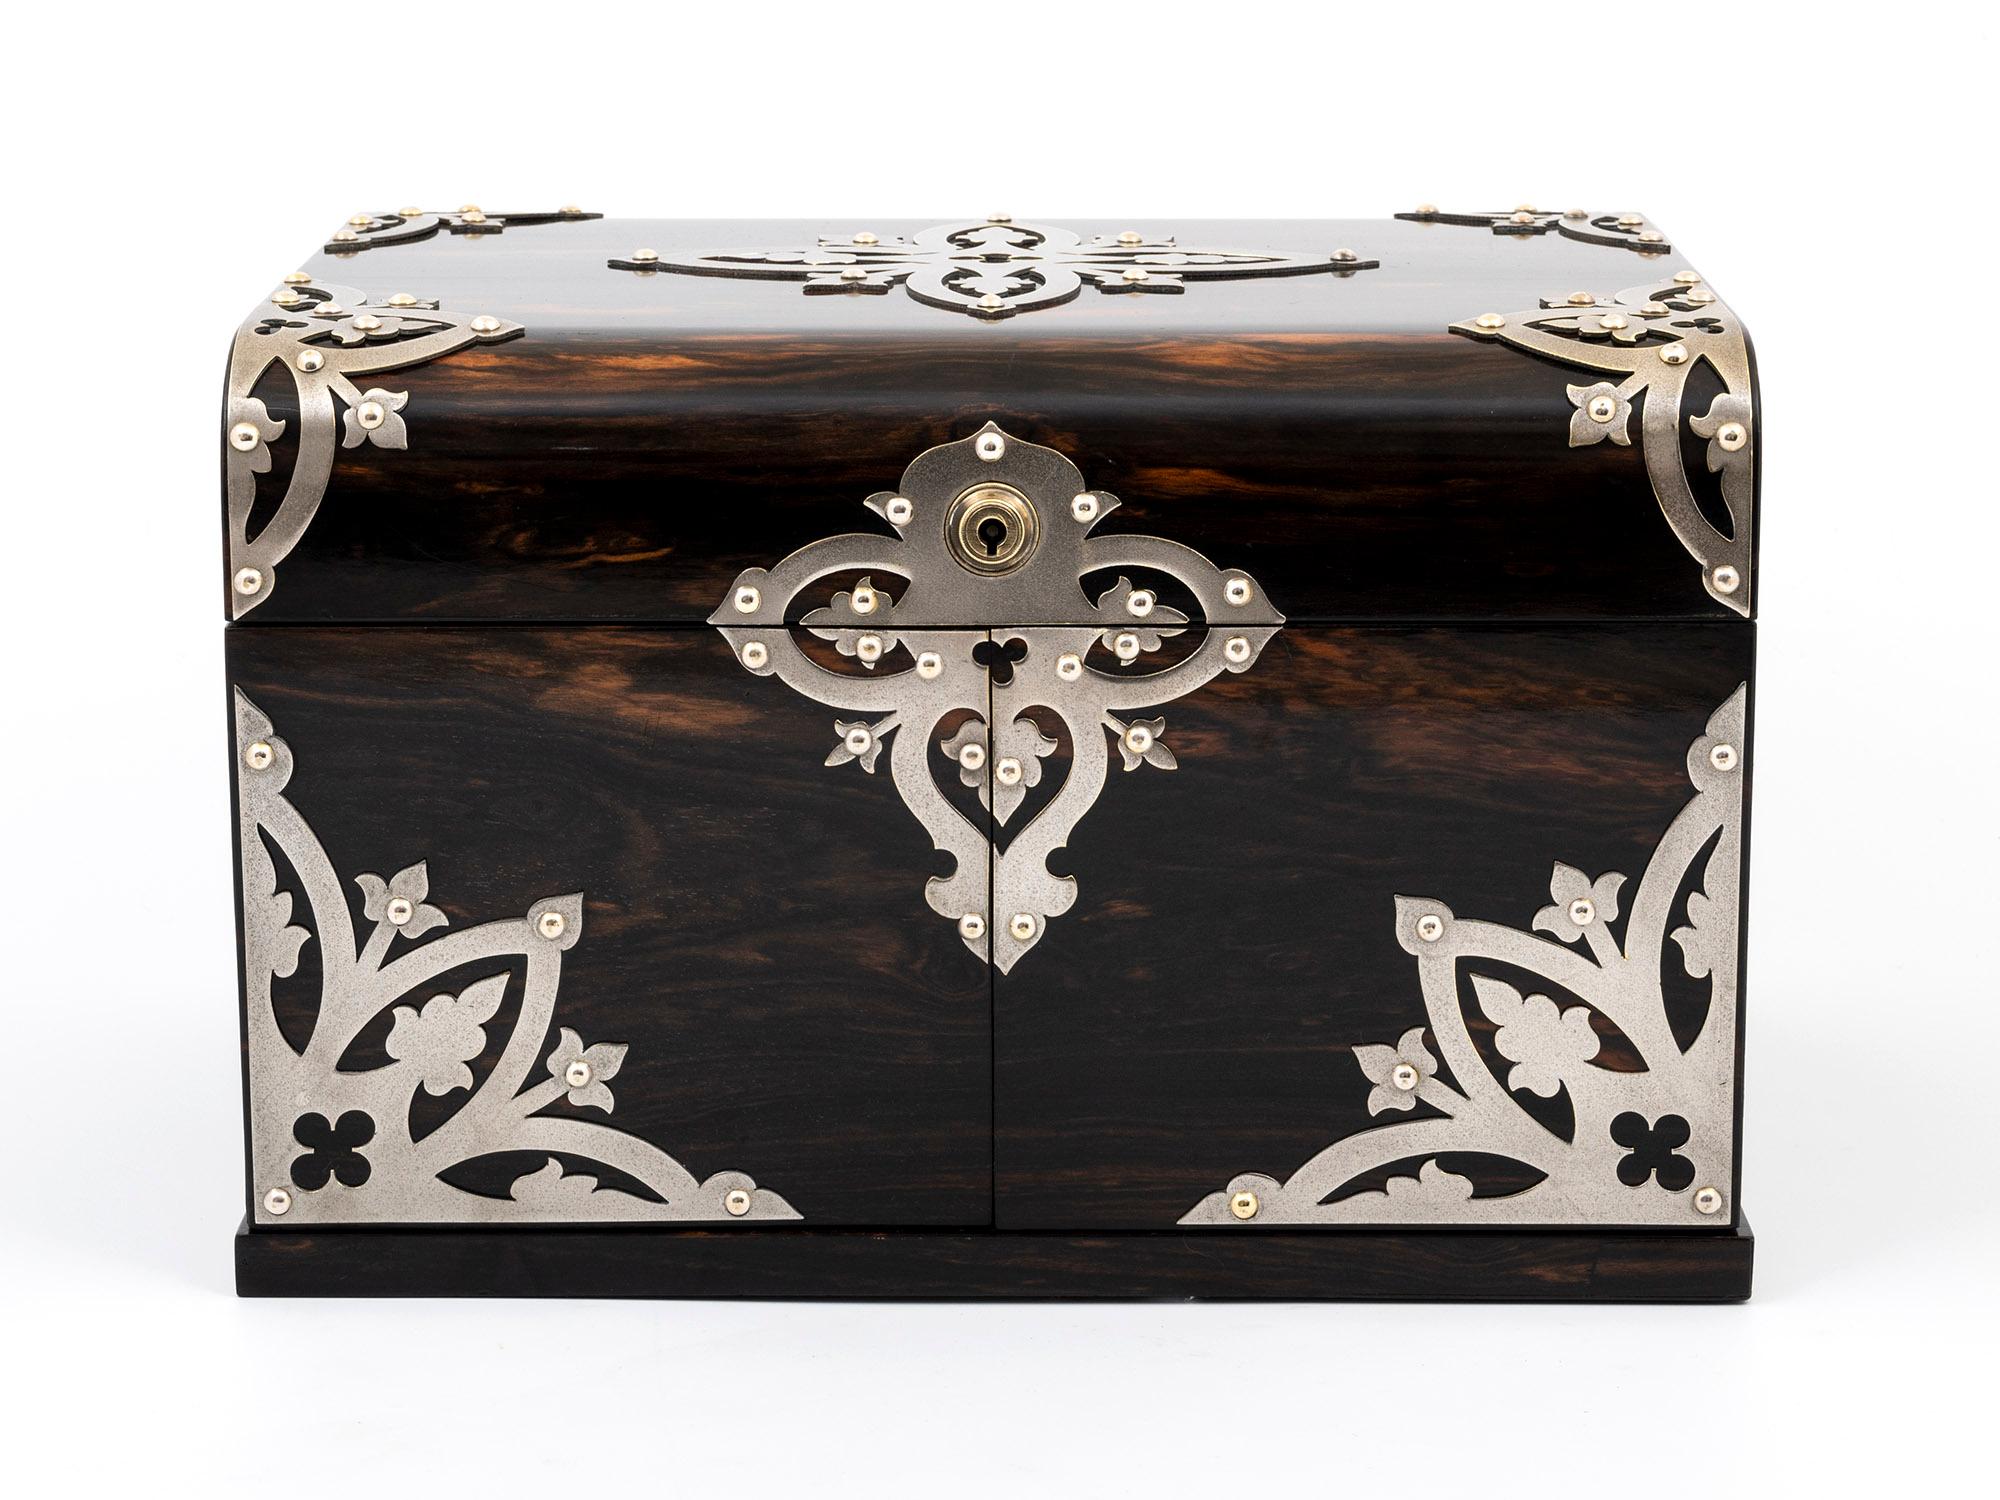 This Jewellery Box is remarkable, a Coromandel & Satinwood lined Jewellery Box by Betjemann.

This dome-top Coromandel Jewellery box features ornate Nickel-plated mounts on the top and front. Featuring a Bramah lock, which, when unlocked, allows